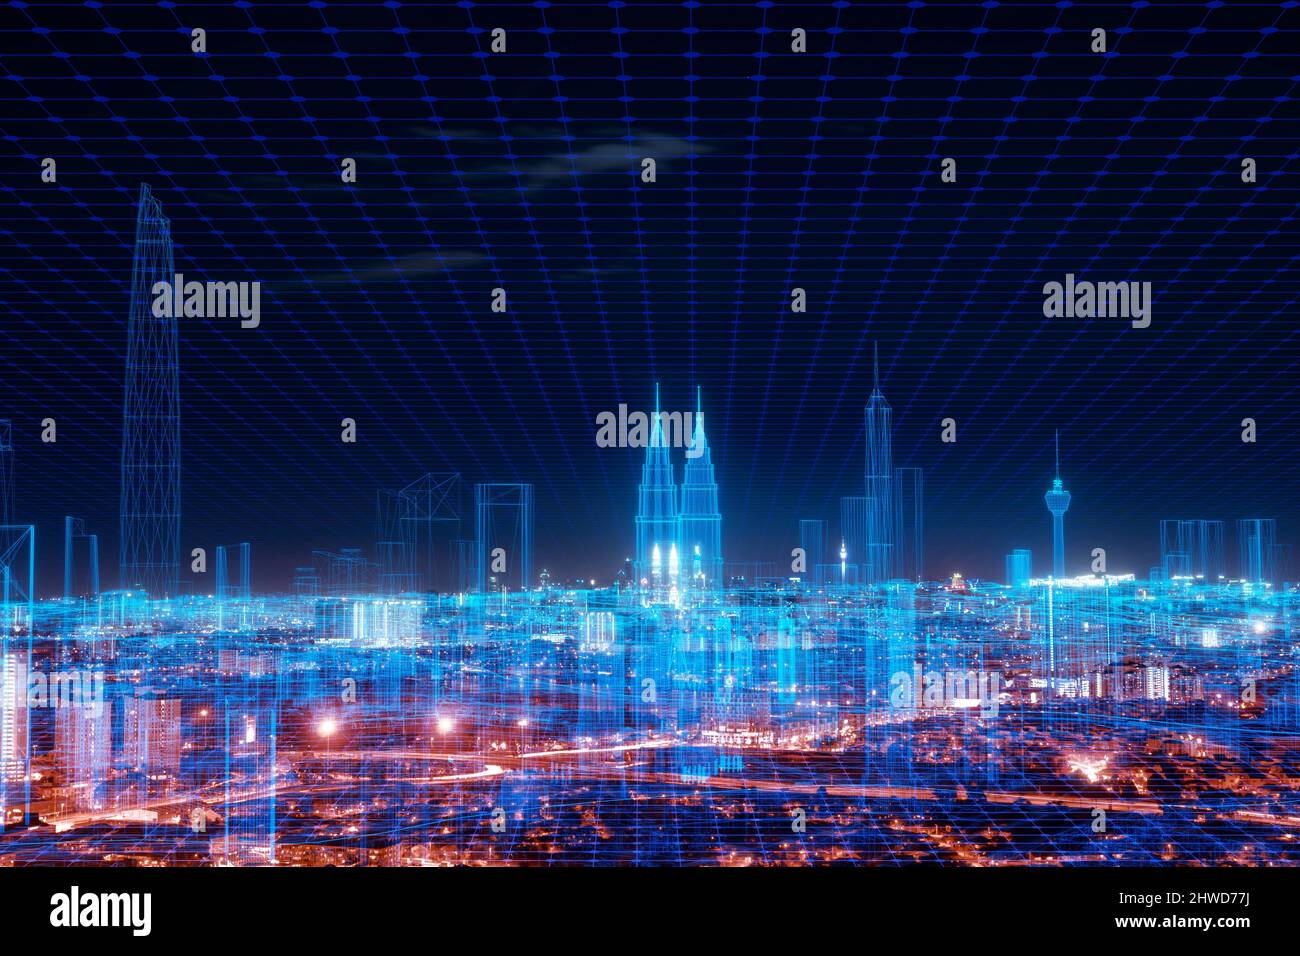 5G network digital hologram and internet of things on city background.5G network wireless systems. Stock Photo